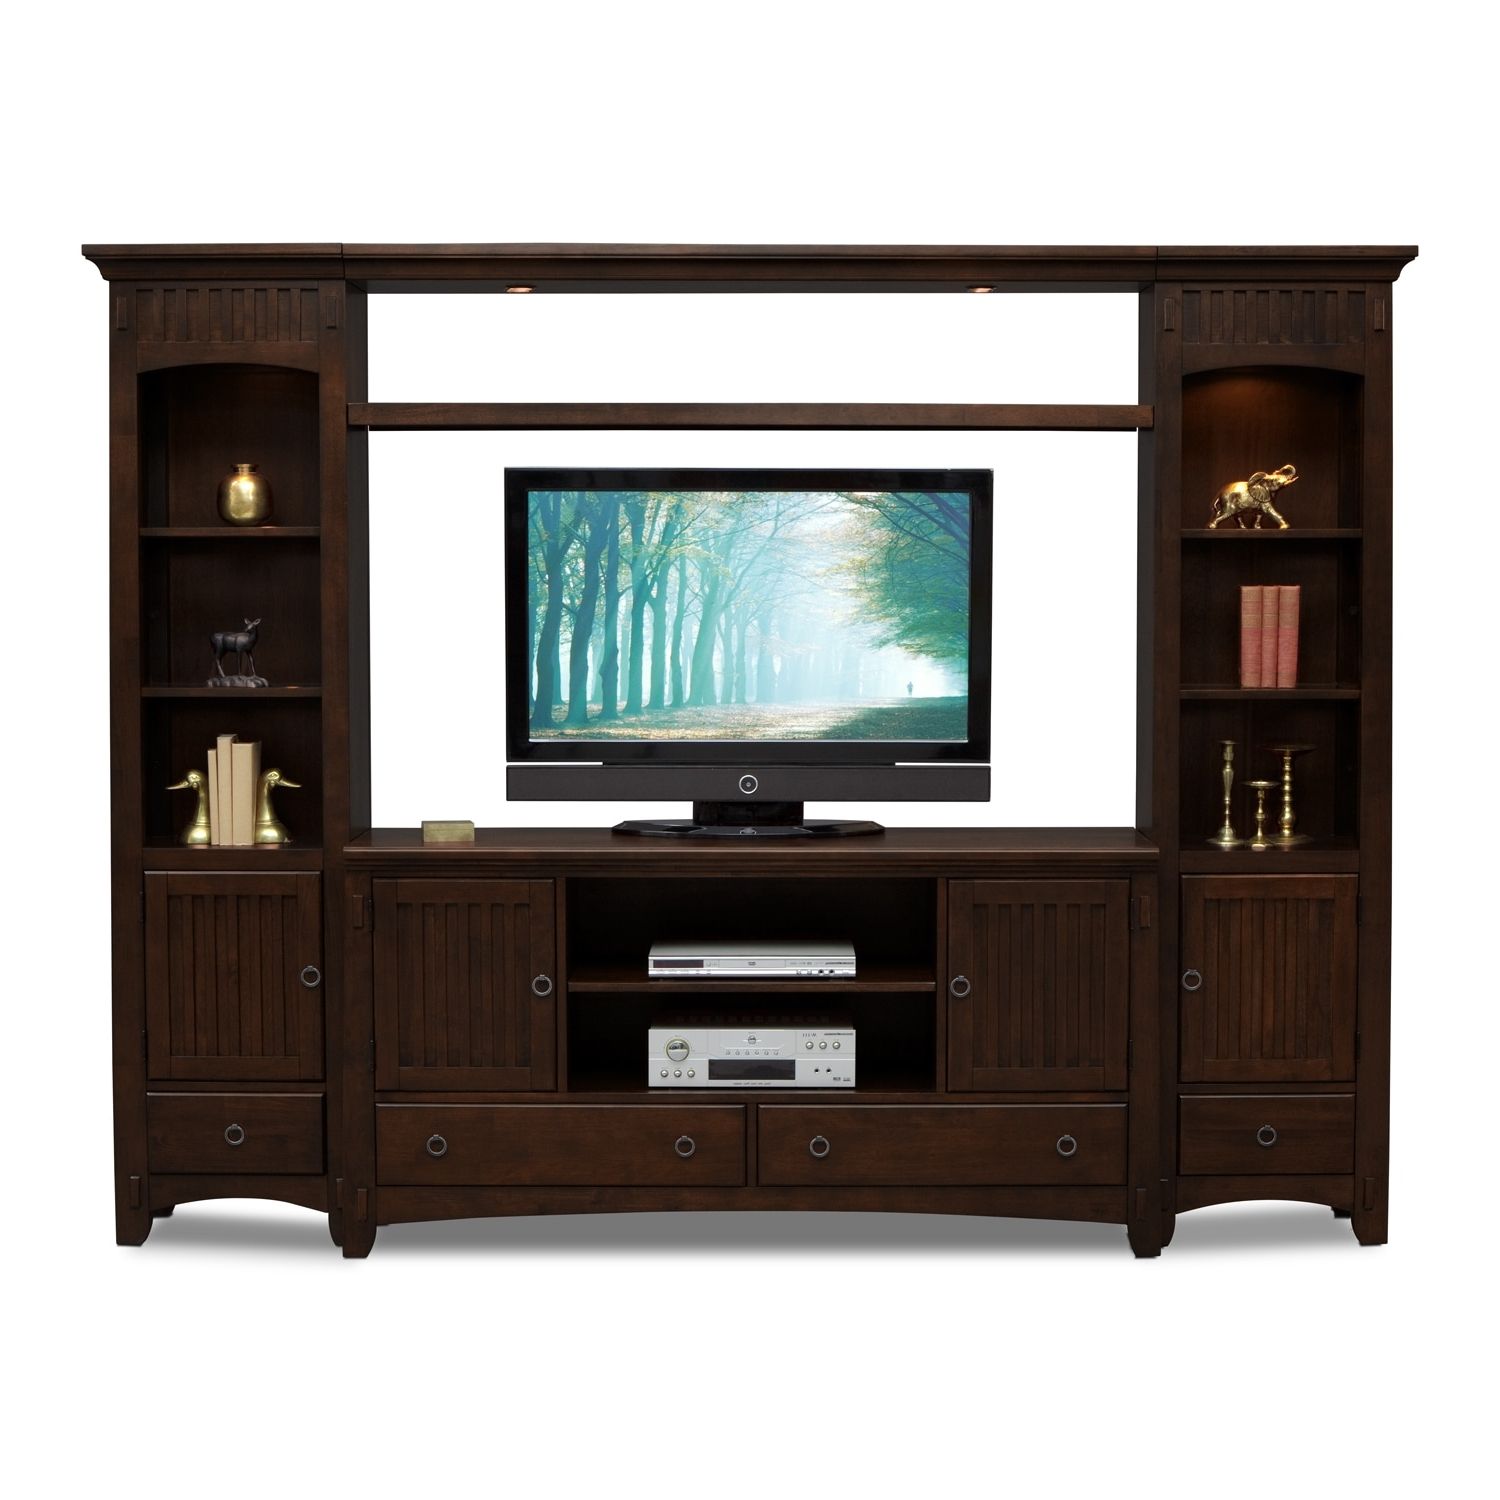 Rustic Tv Stands For Sale Inside Most Recent T V Stands & Media Centers (View 17 of 20)